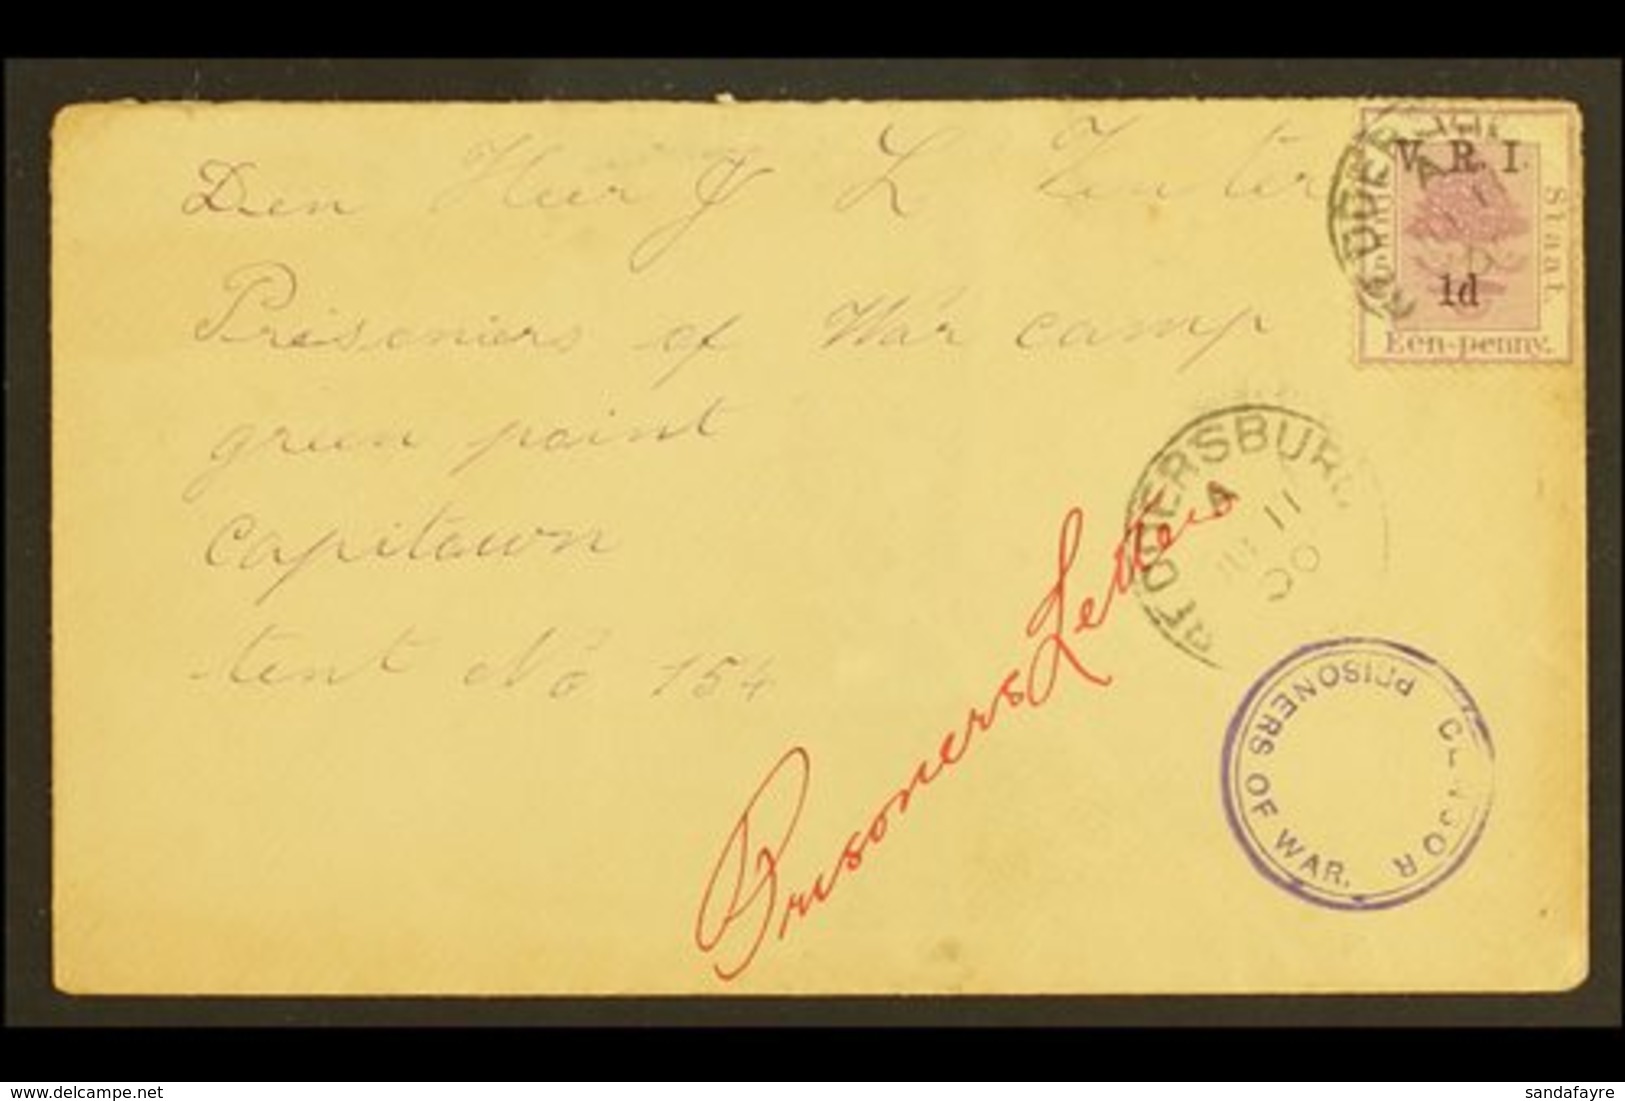 BOER WAR 1900 (11 June) Cover To Prisoner Of War Camp At Green Point, Cape Town, Bearing OFS 1d "V.R.I." Tied By Redders - Unclassified